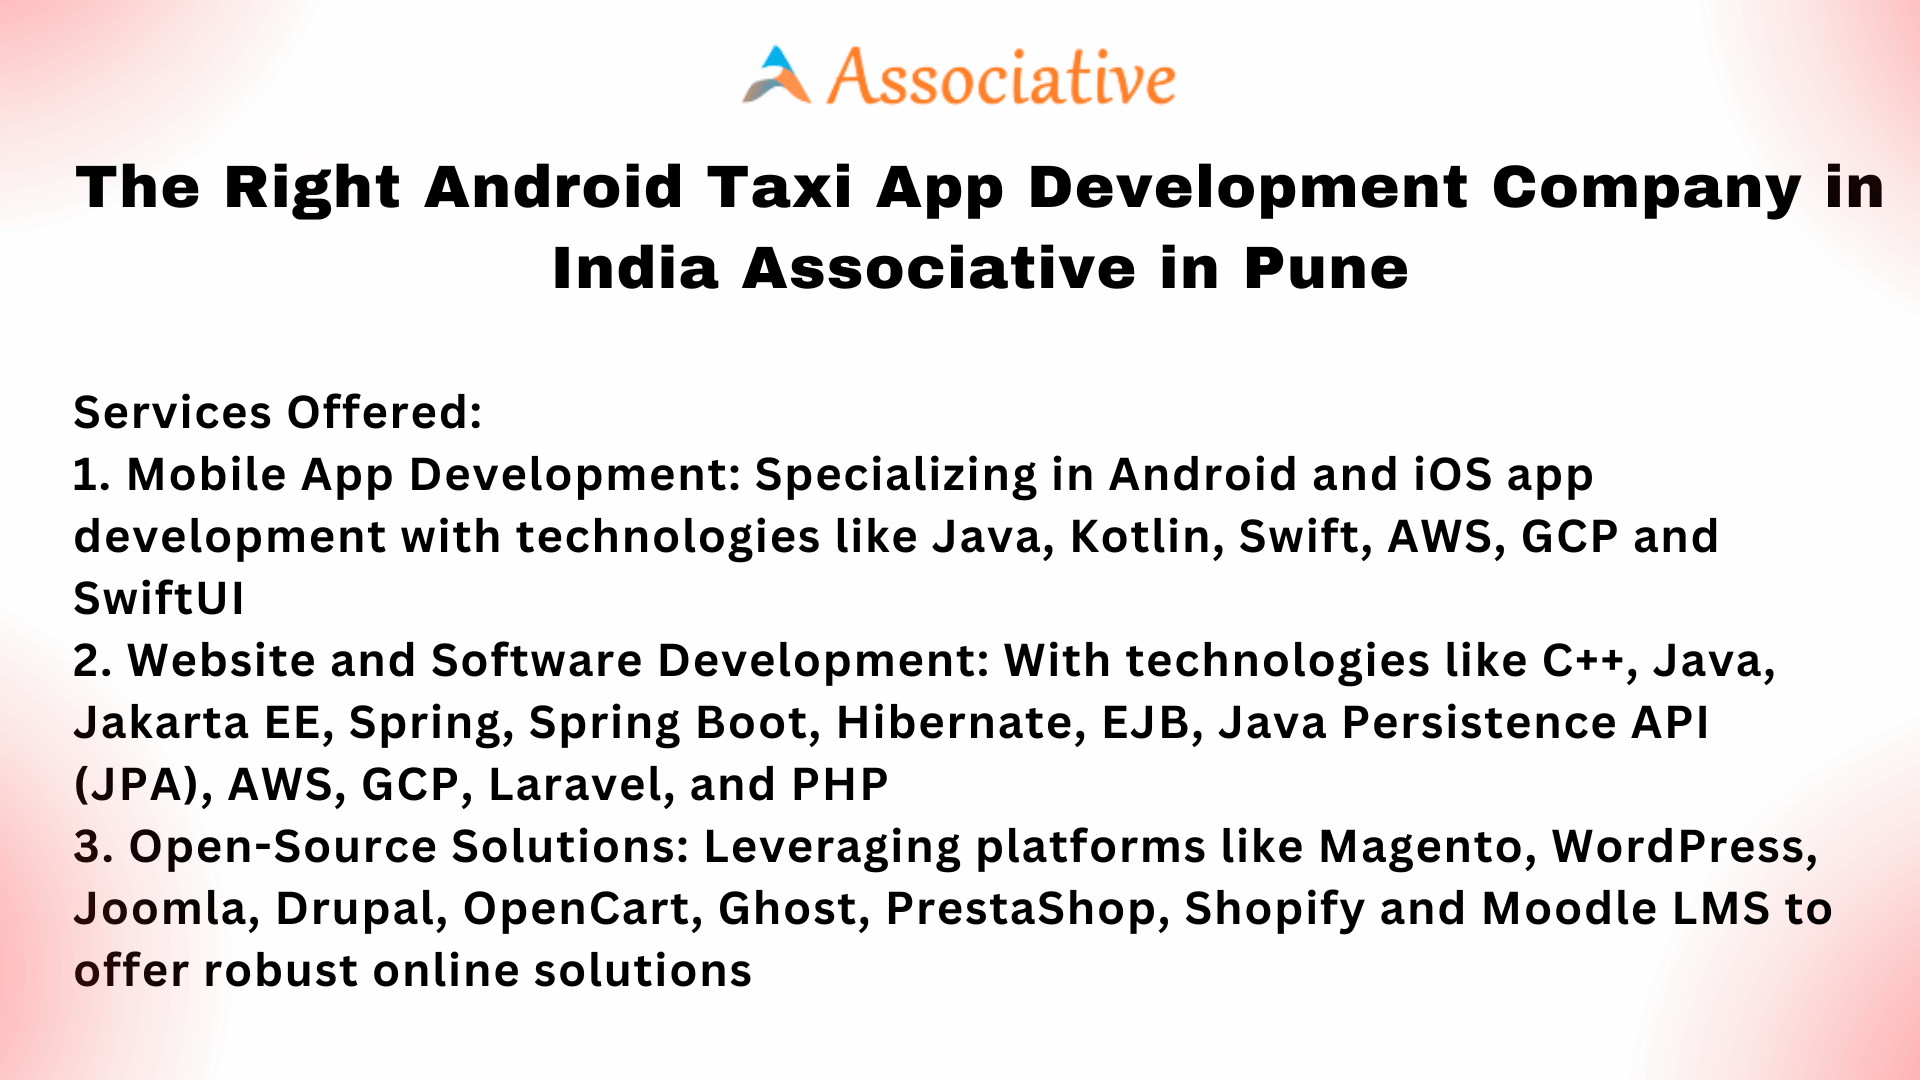 The Right Android Taxi App Development Company in India Associative in Pune